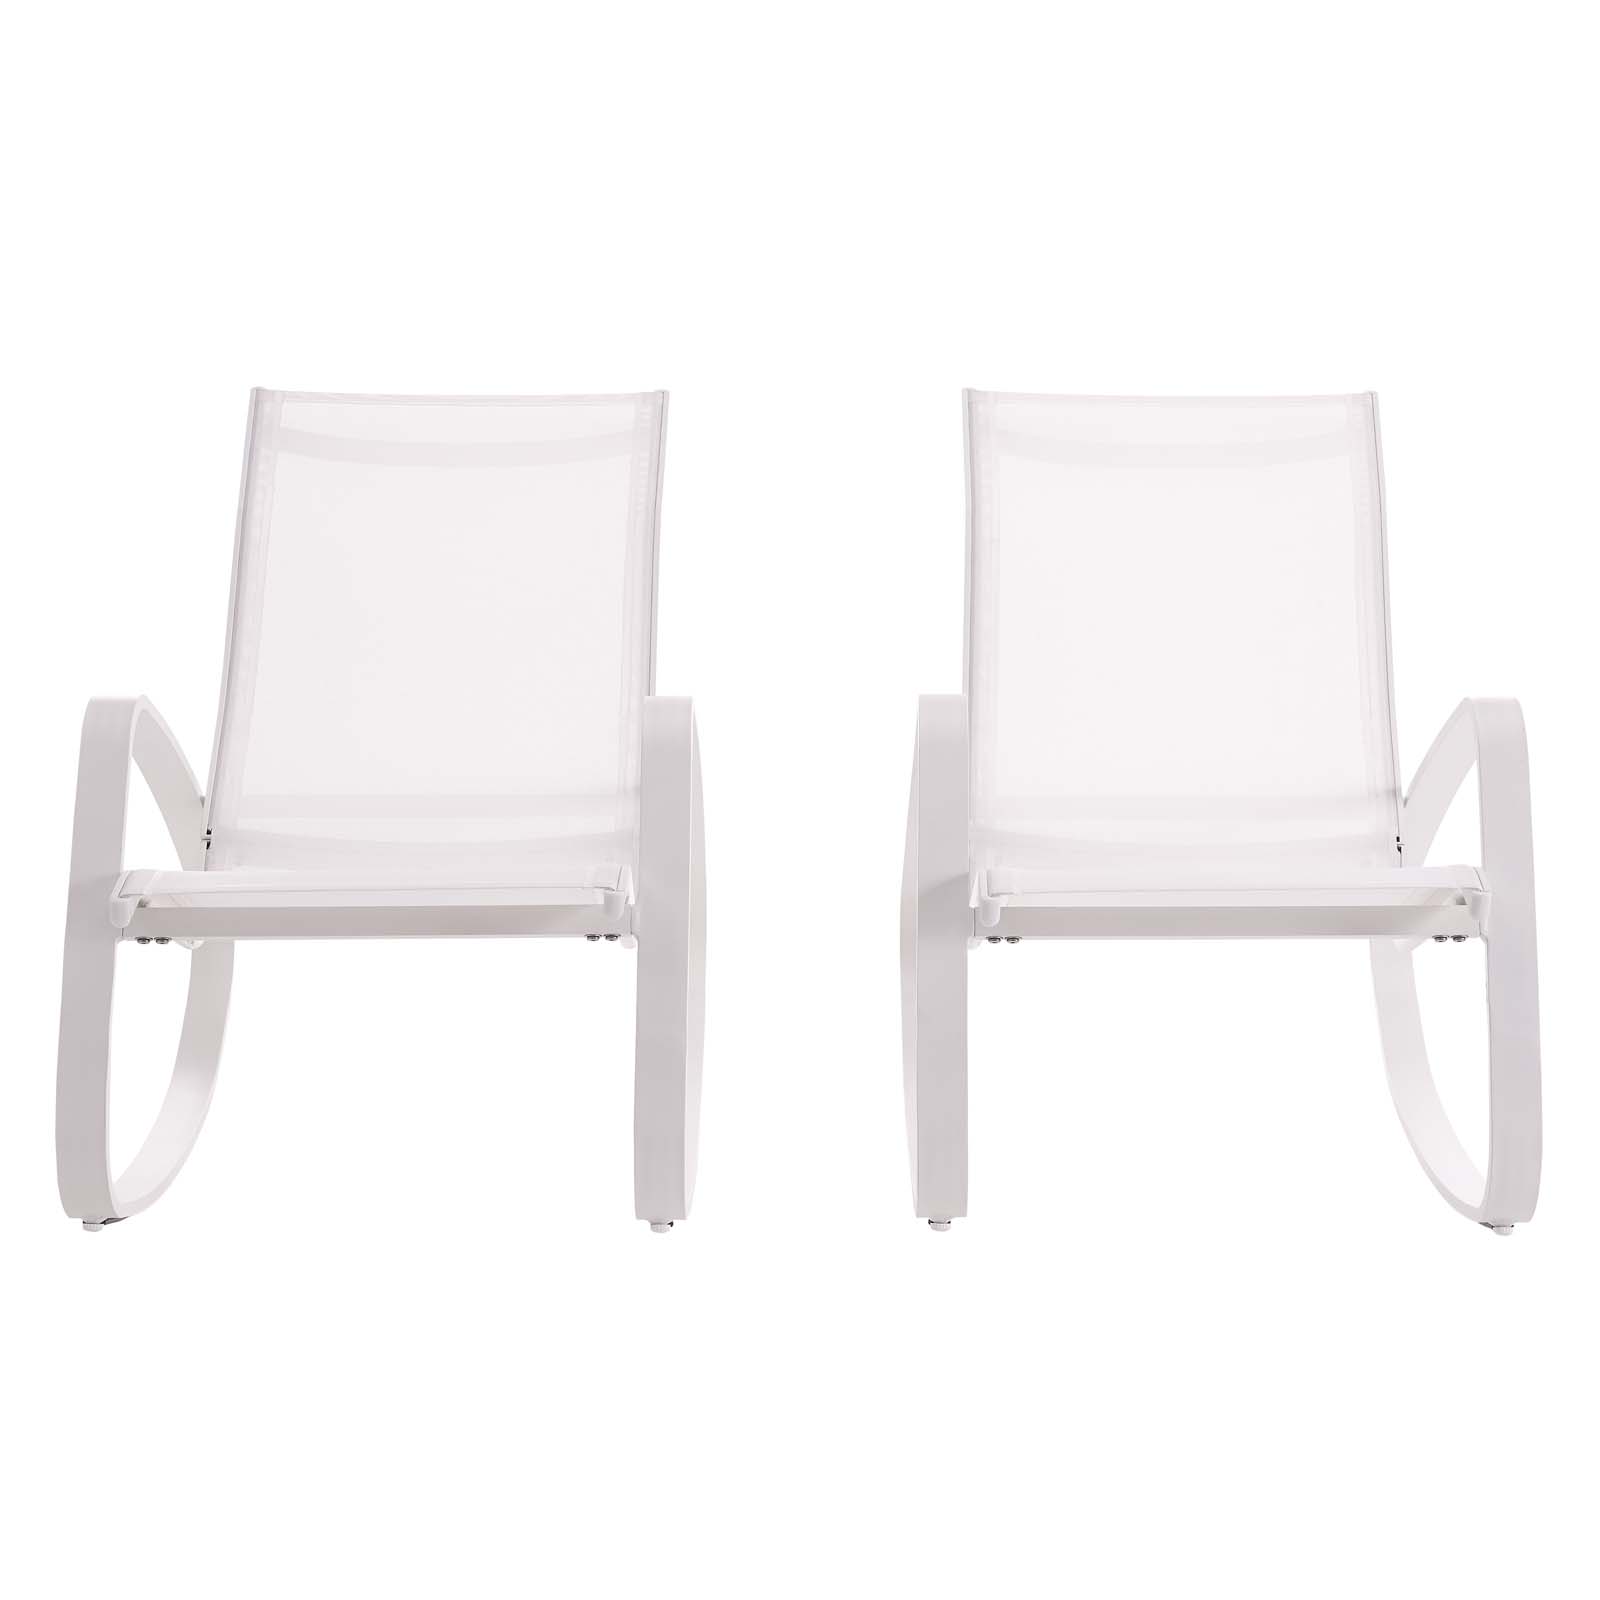 Modern Contemporary Urban Design Outdoor Patio Balcony Garden Furniture Lounge Chair Set, Set of Two, Aluminum Metal Steel, White - image 4 of 6